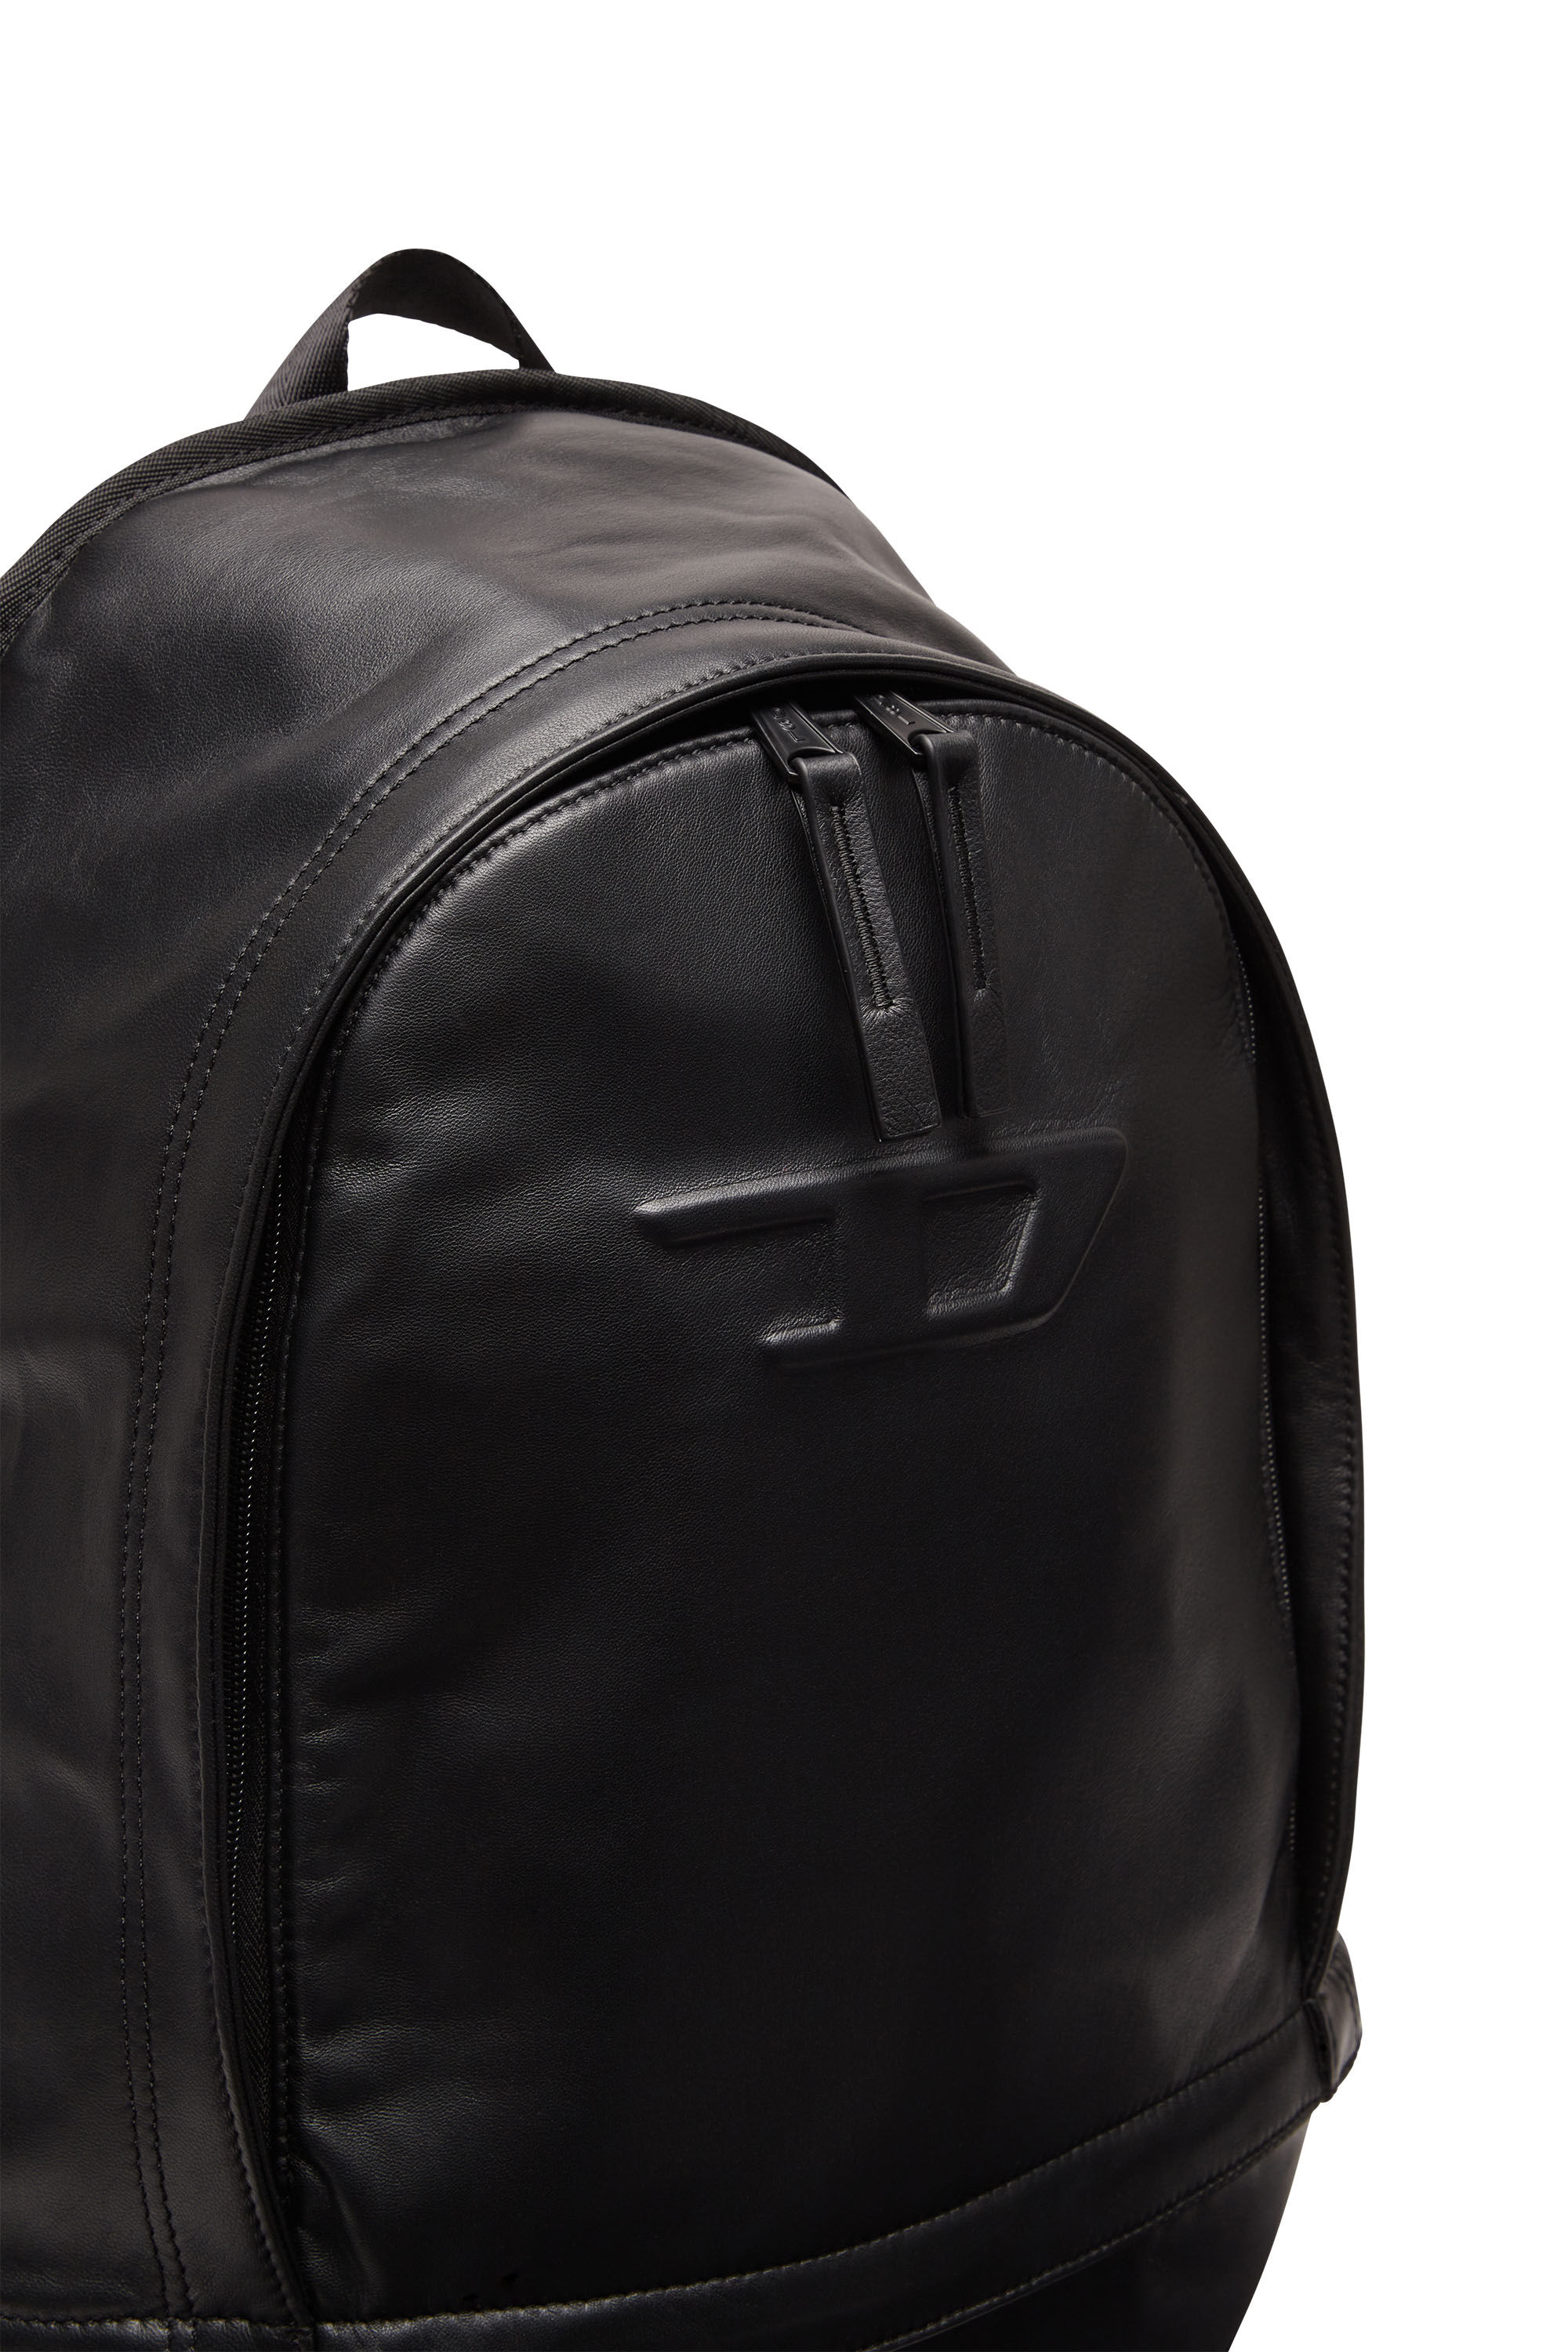 Men's Rave Backpack - Leather backpack with embossed D logo | RAVE